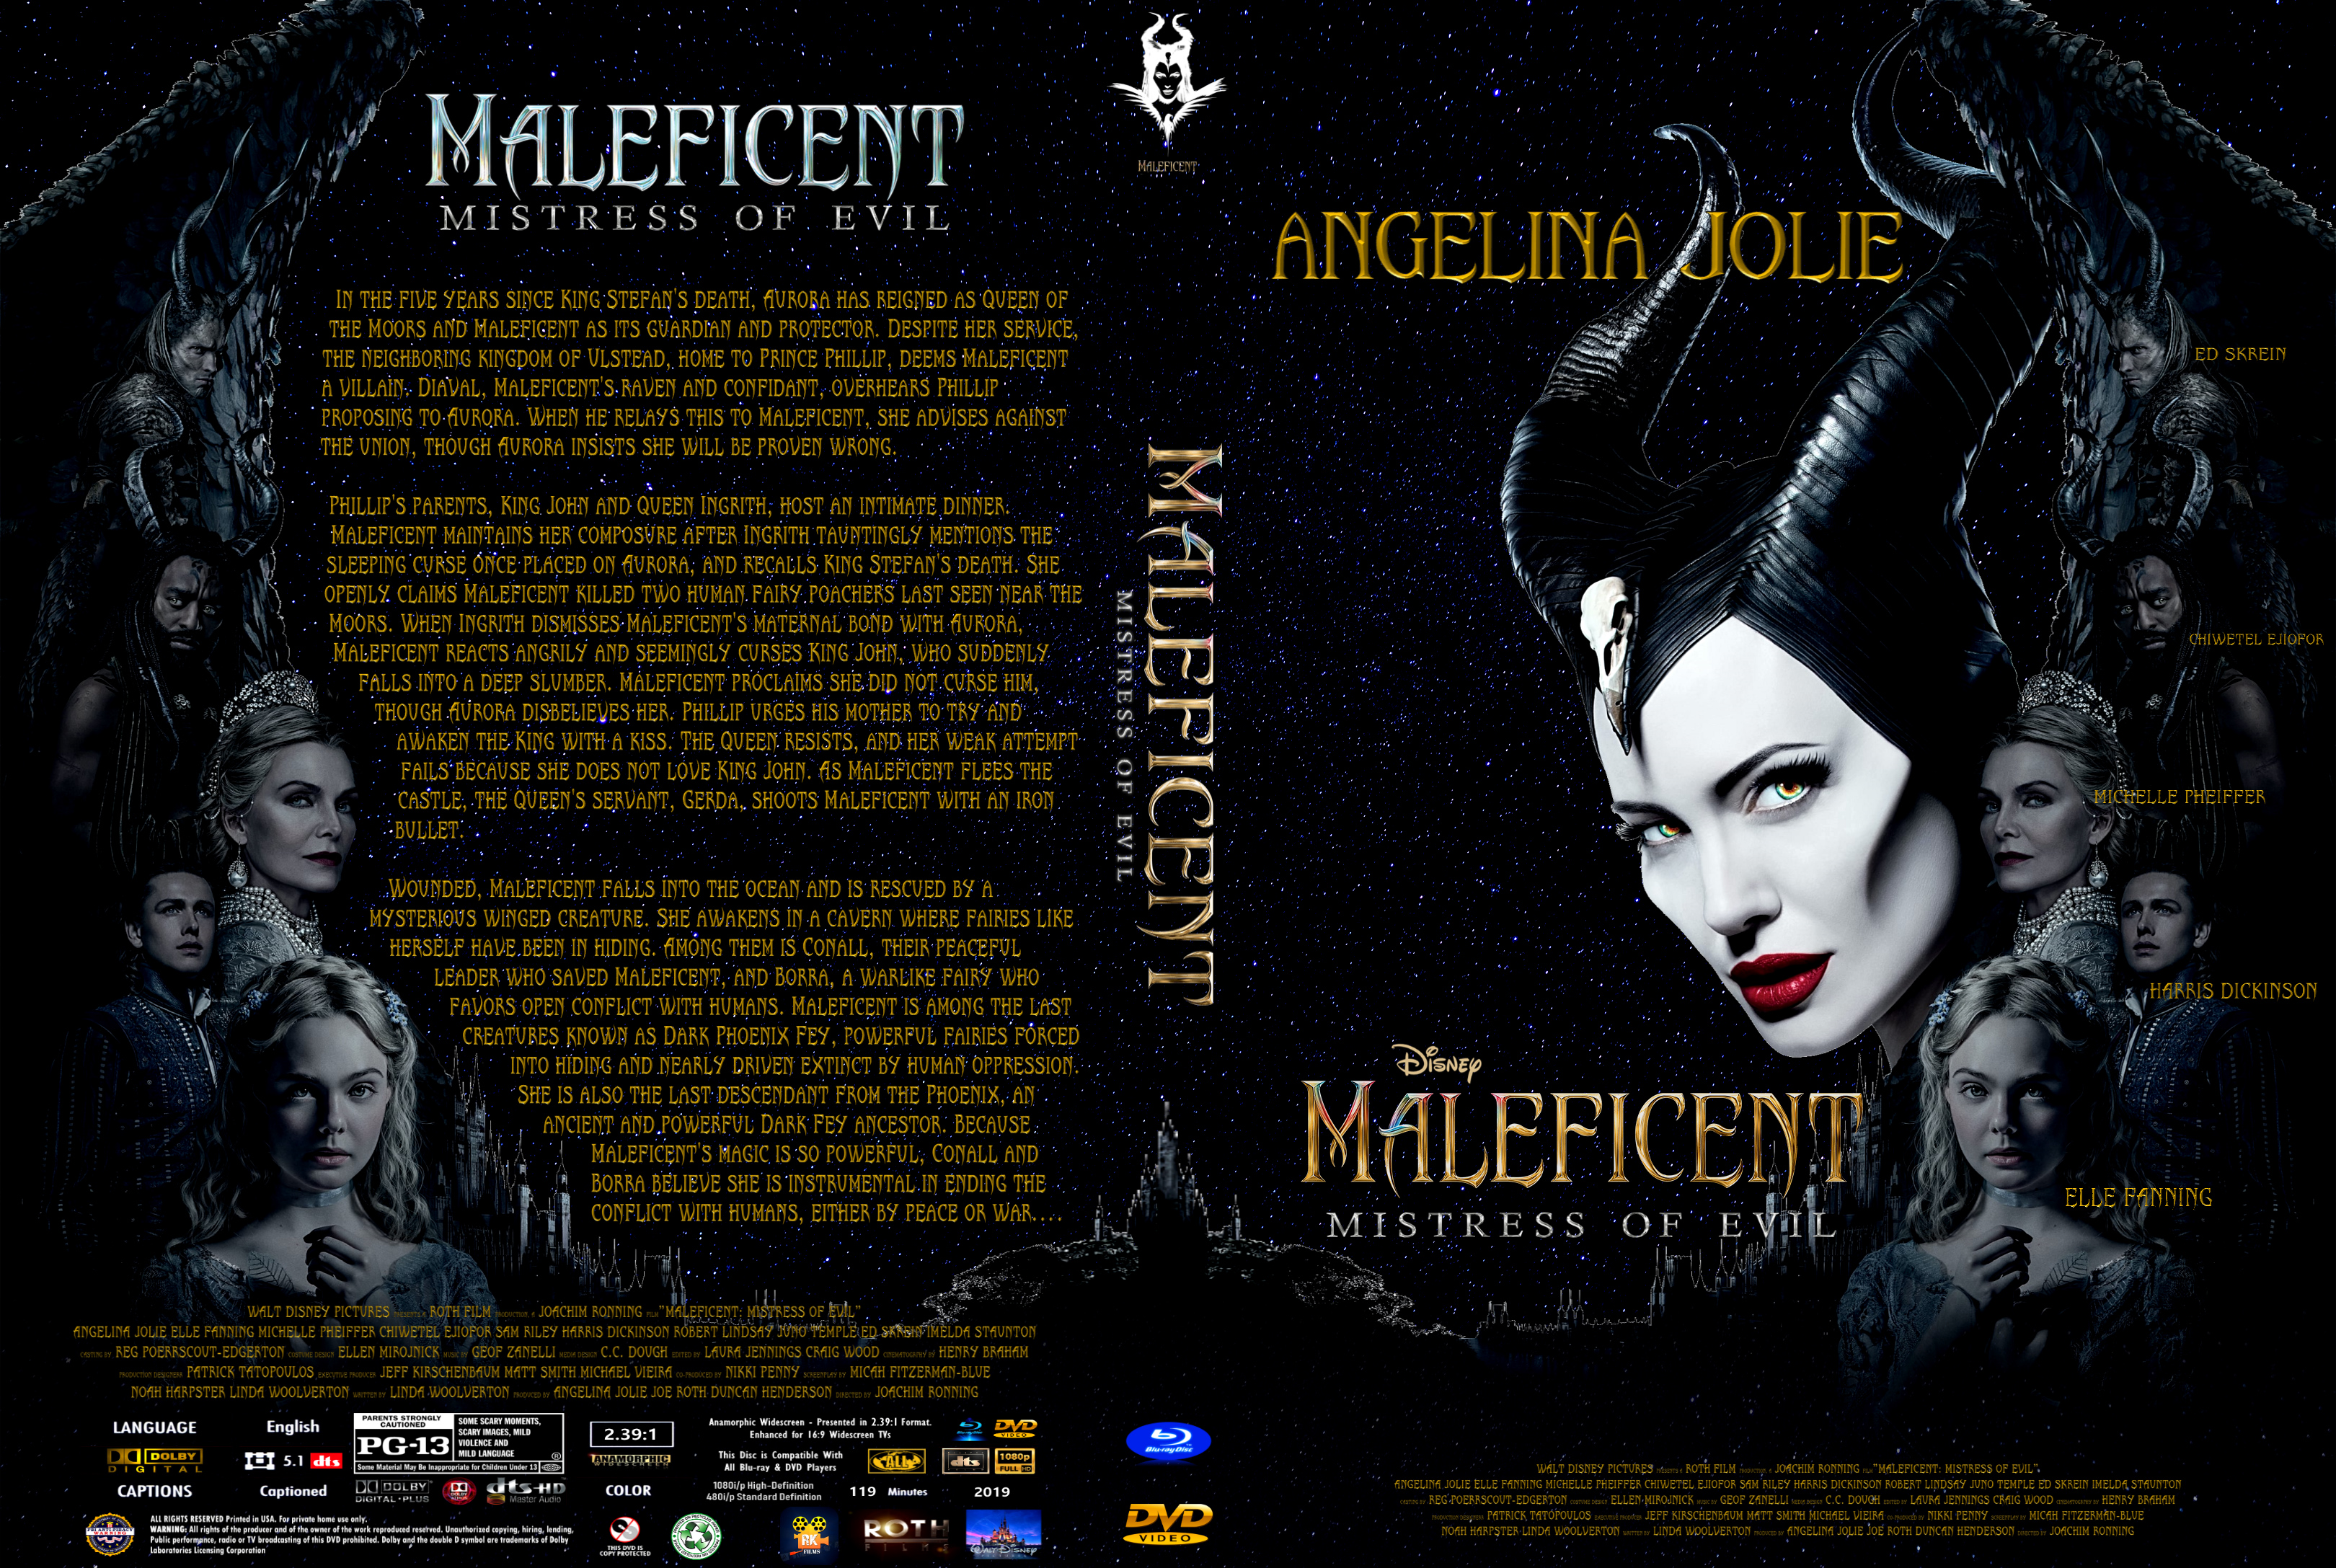 Covers Box Sk Maleficent Mistress Of Evil 19 High Quality Dvd Blueray Movie